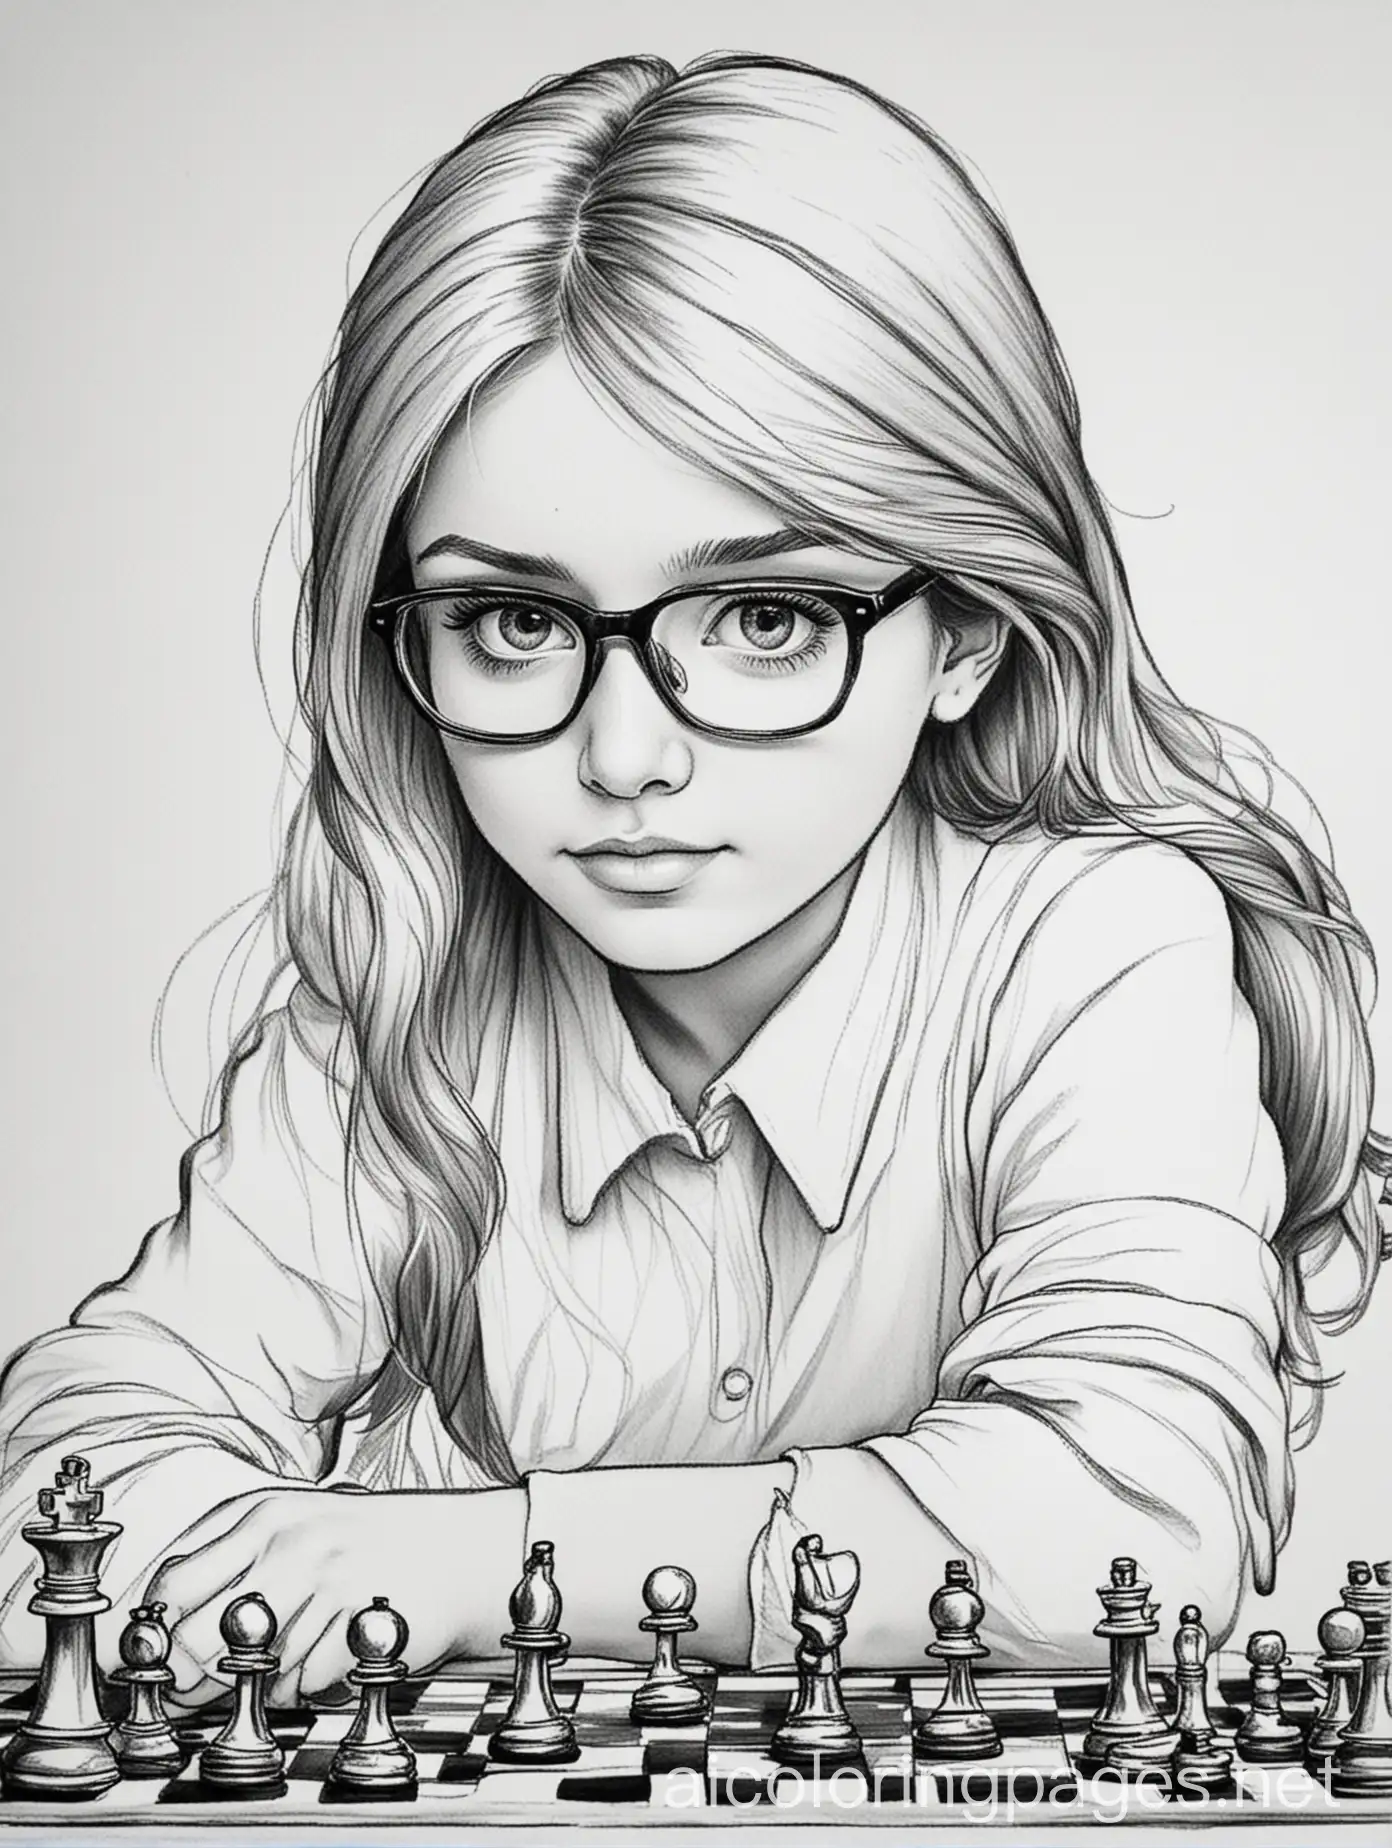 2d line art sketch of a girl playing chess. she is wearing glasses. it is for a coloring book for kids. so the drawing should be simple. Coloring Page, black and white, line art, white background, Simplicity, Ample White Space, Coloring Page, black and white, line art, white background, Simplicity, Ample White Space. The background of the coloring page is plain white to make it easy for young children to color within the lines. The outlines of all the subjects are easy to distinguish, making it simple for kids to color without too much difficulty